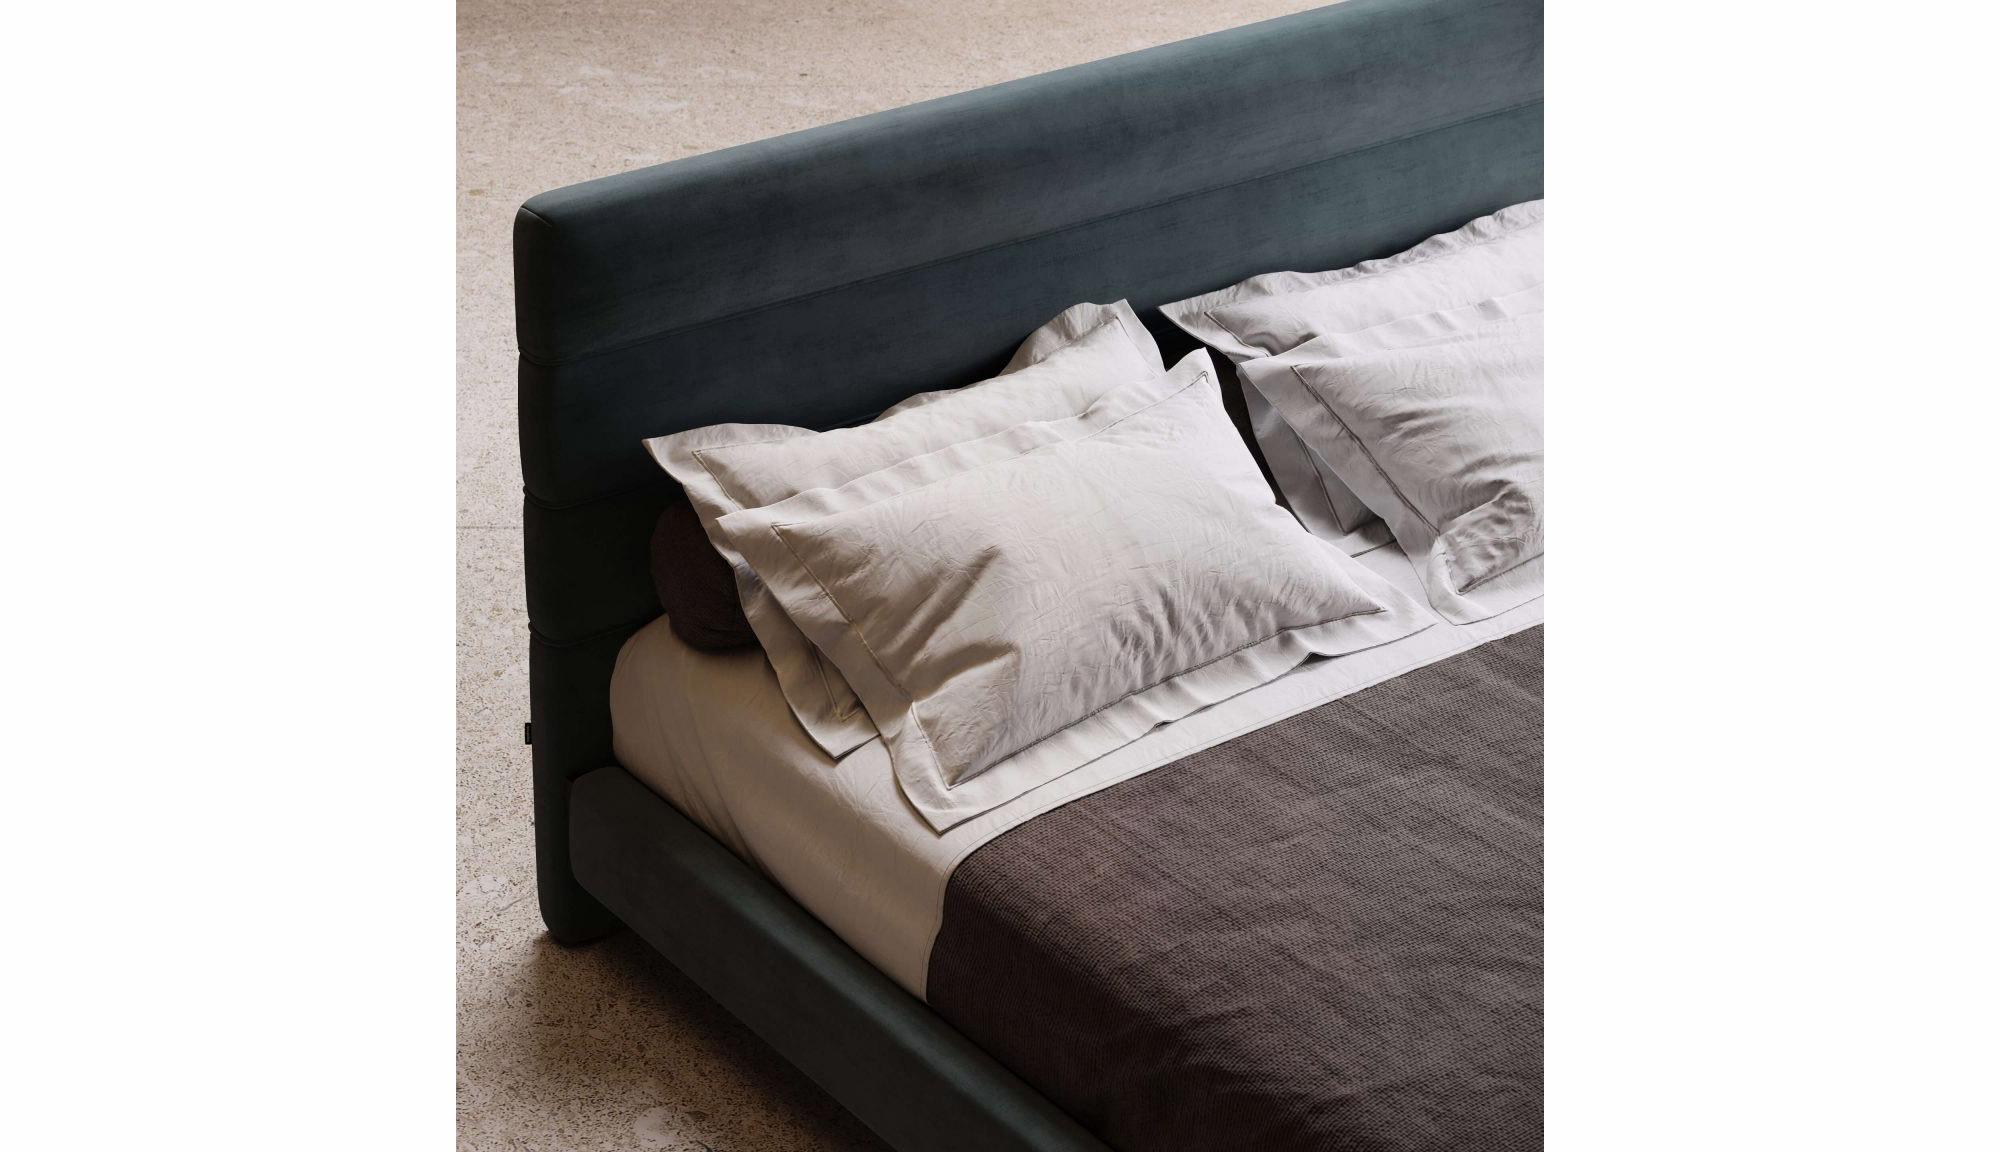 american king size bed dimensions